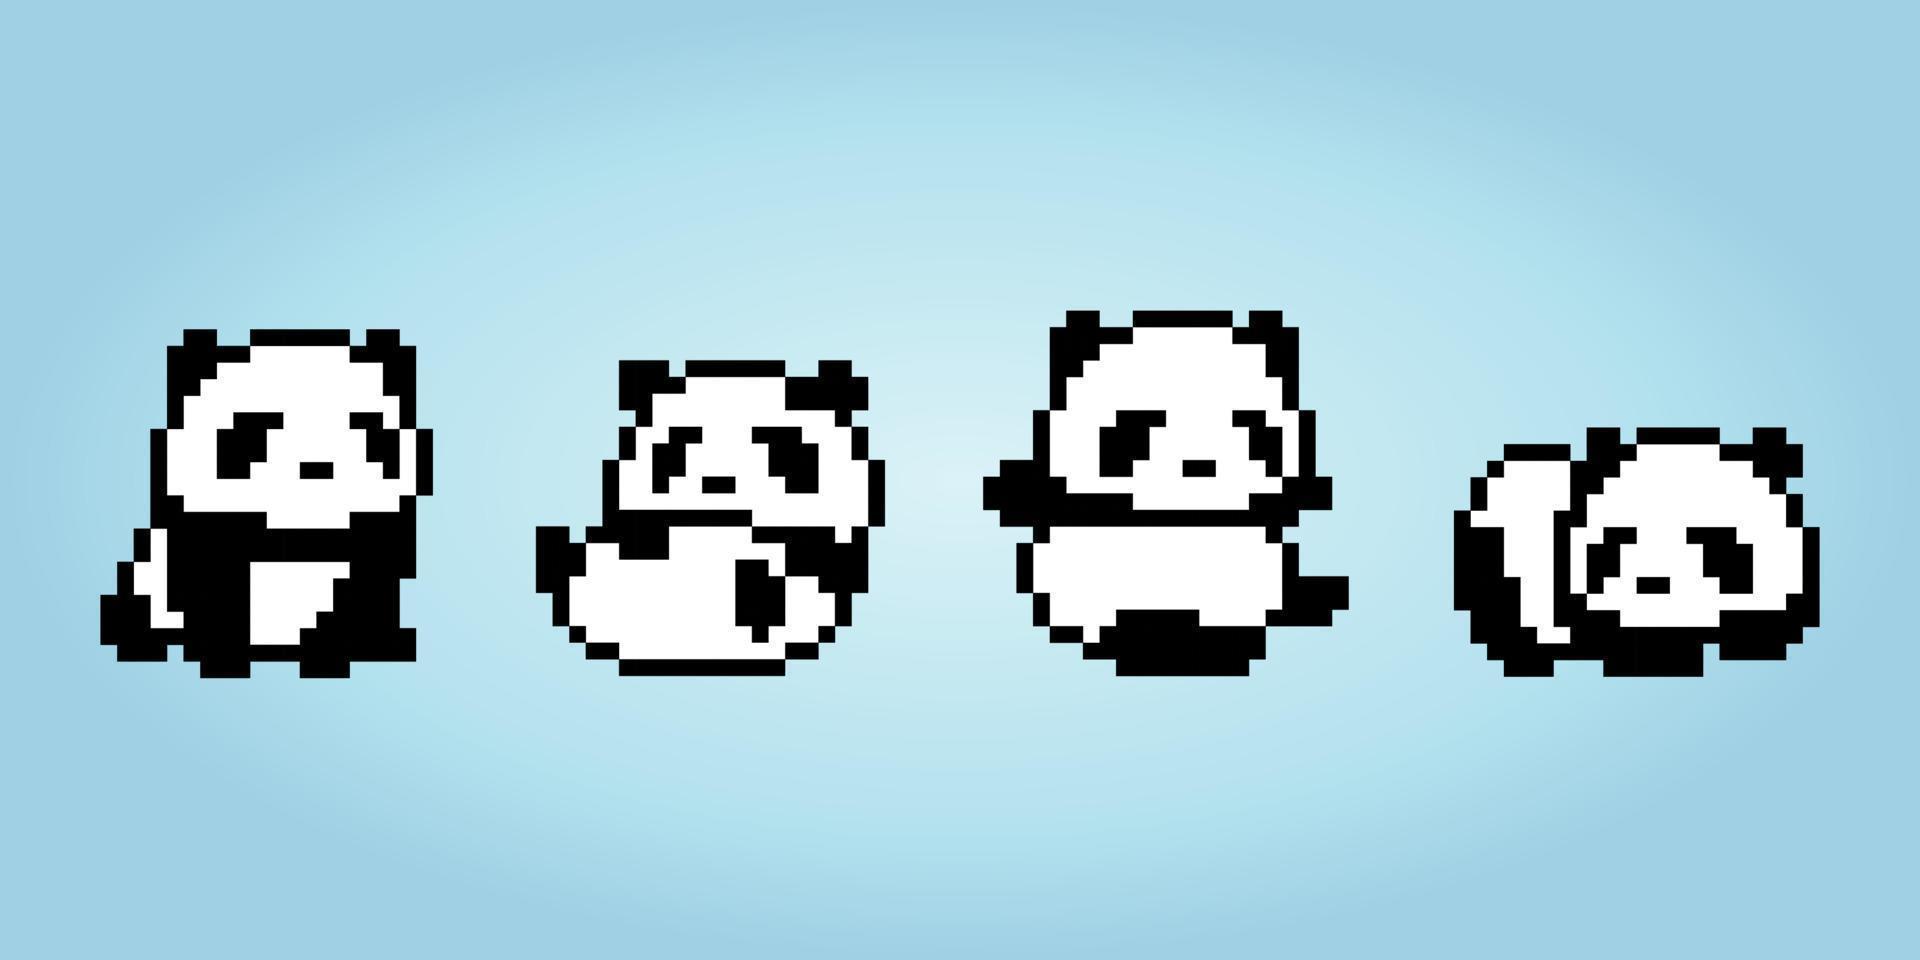 Pixel collection of 8 bit pandas. Animals for game assets and cross stitch patterns in vector illustrations.